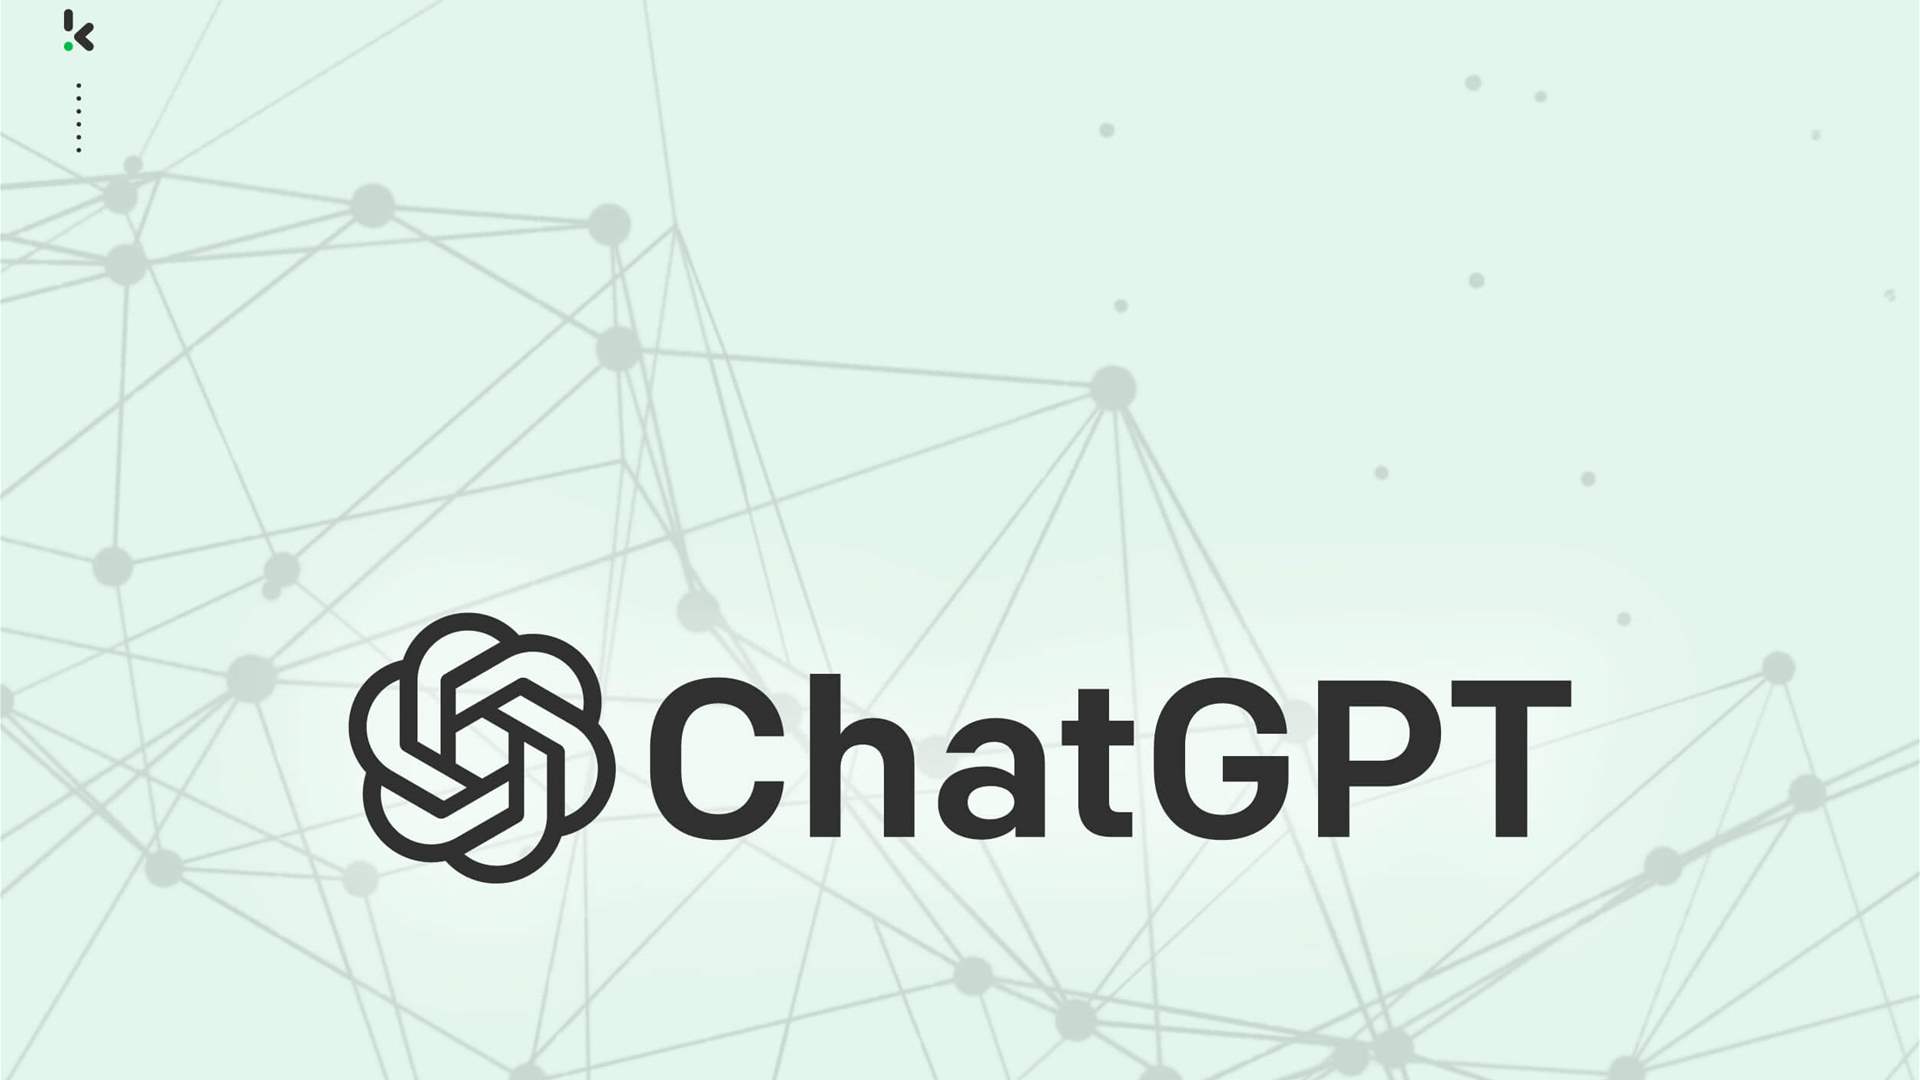 Poland opens privacy probe of ChatGPT following GDPR complaint